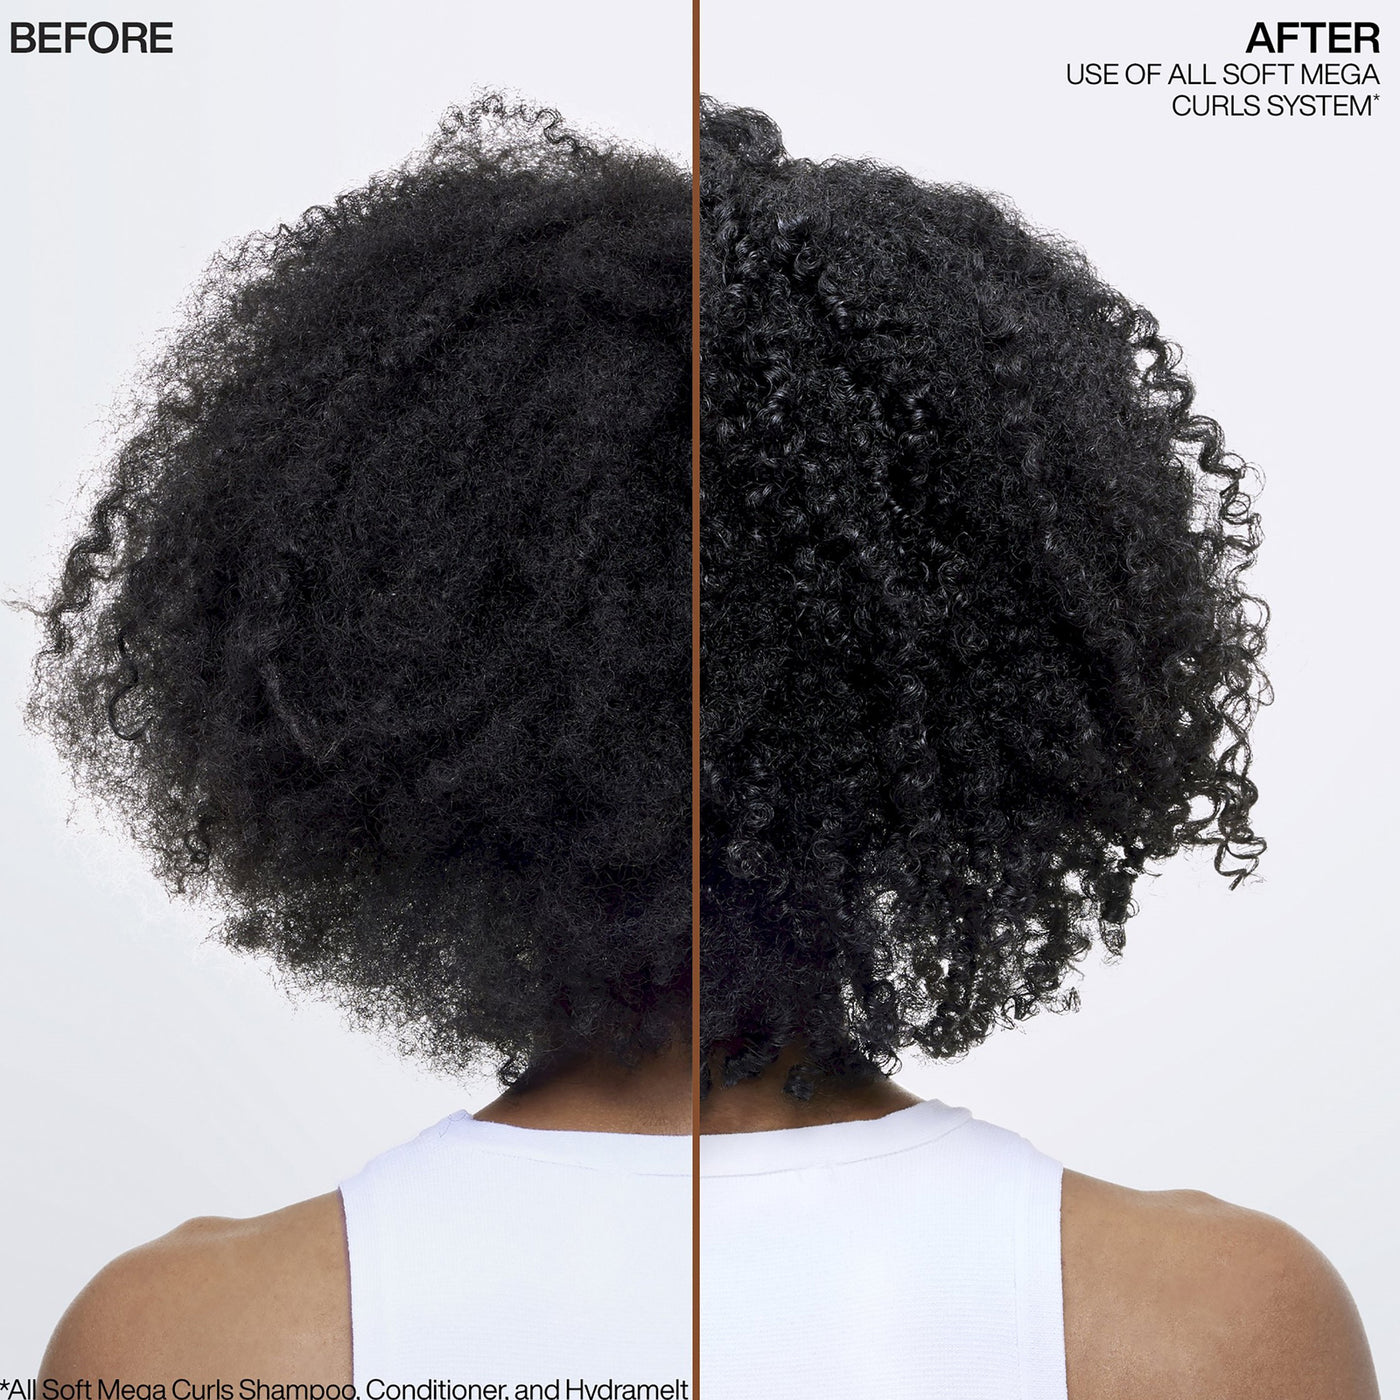 Redken All Soft Mega Curls Conditioner (1 Litre) before and after